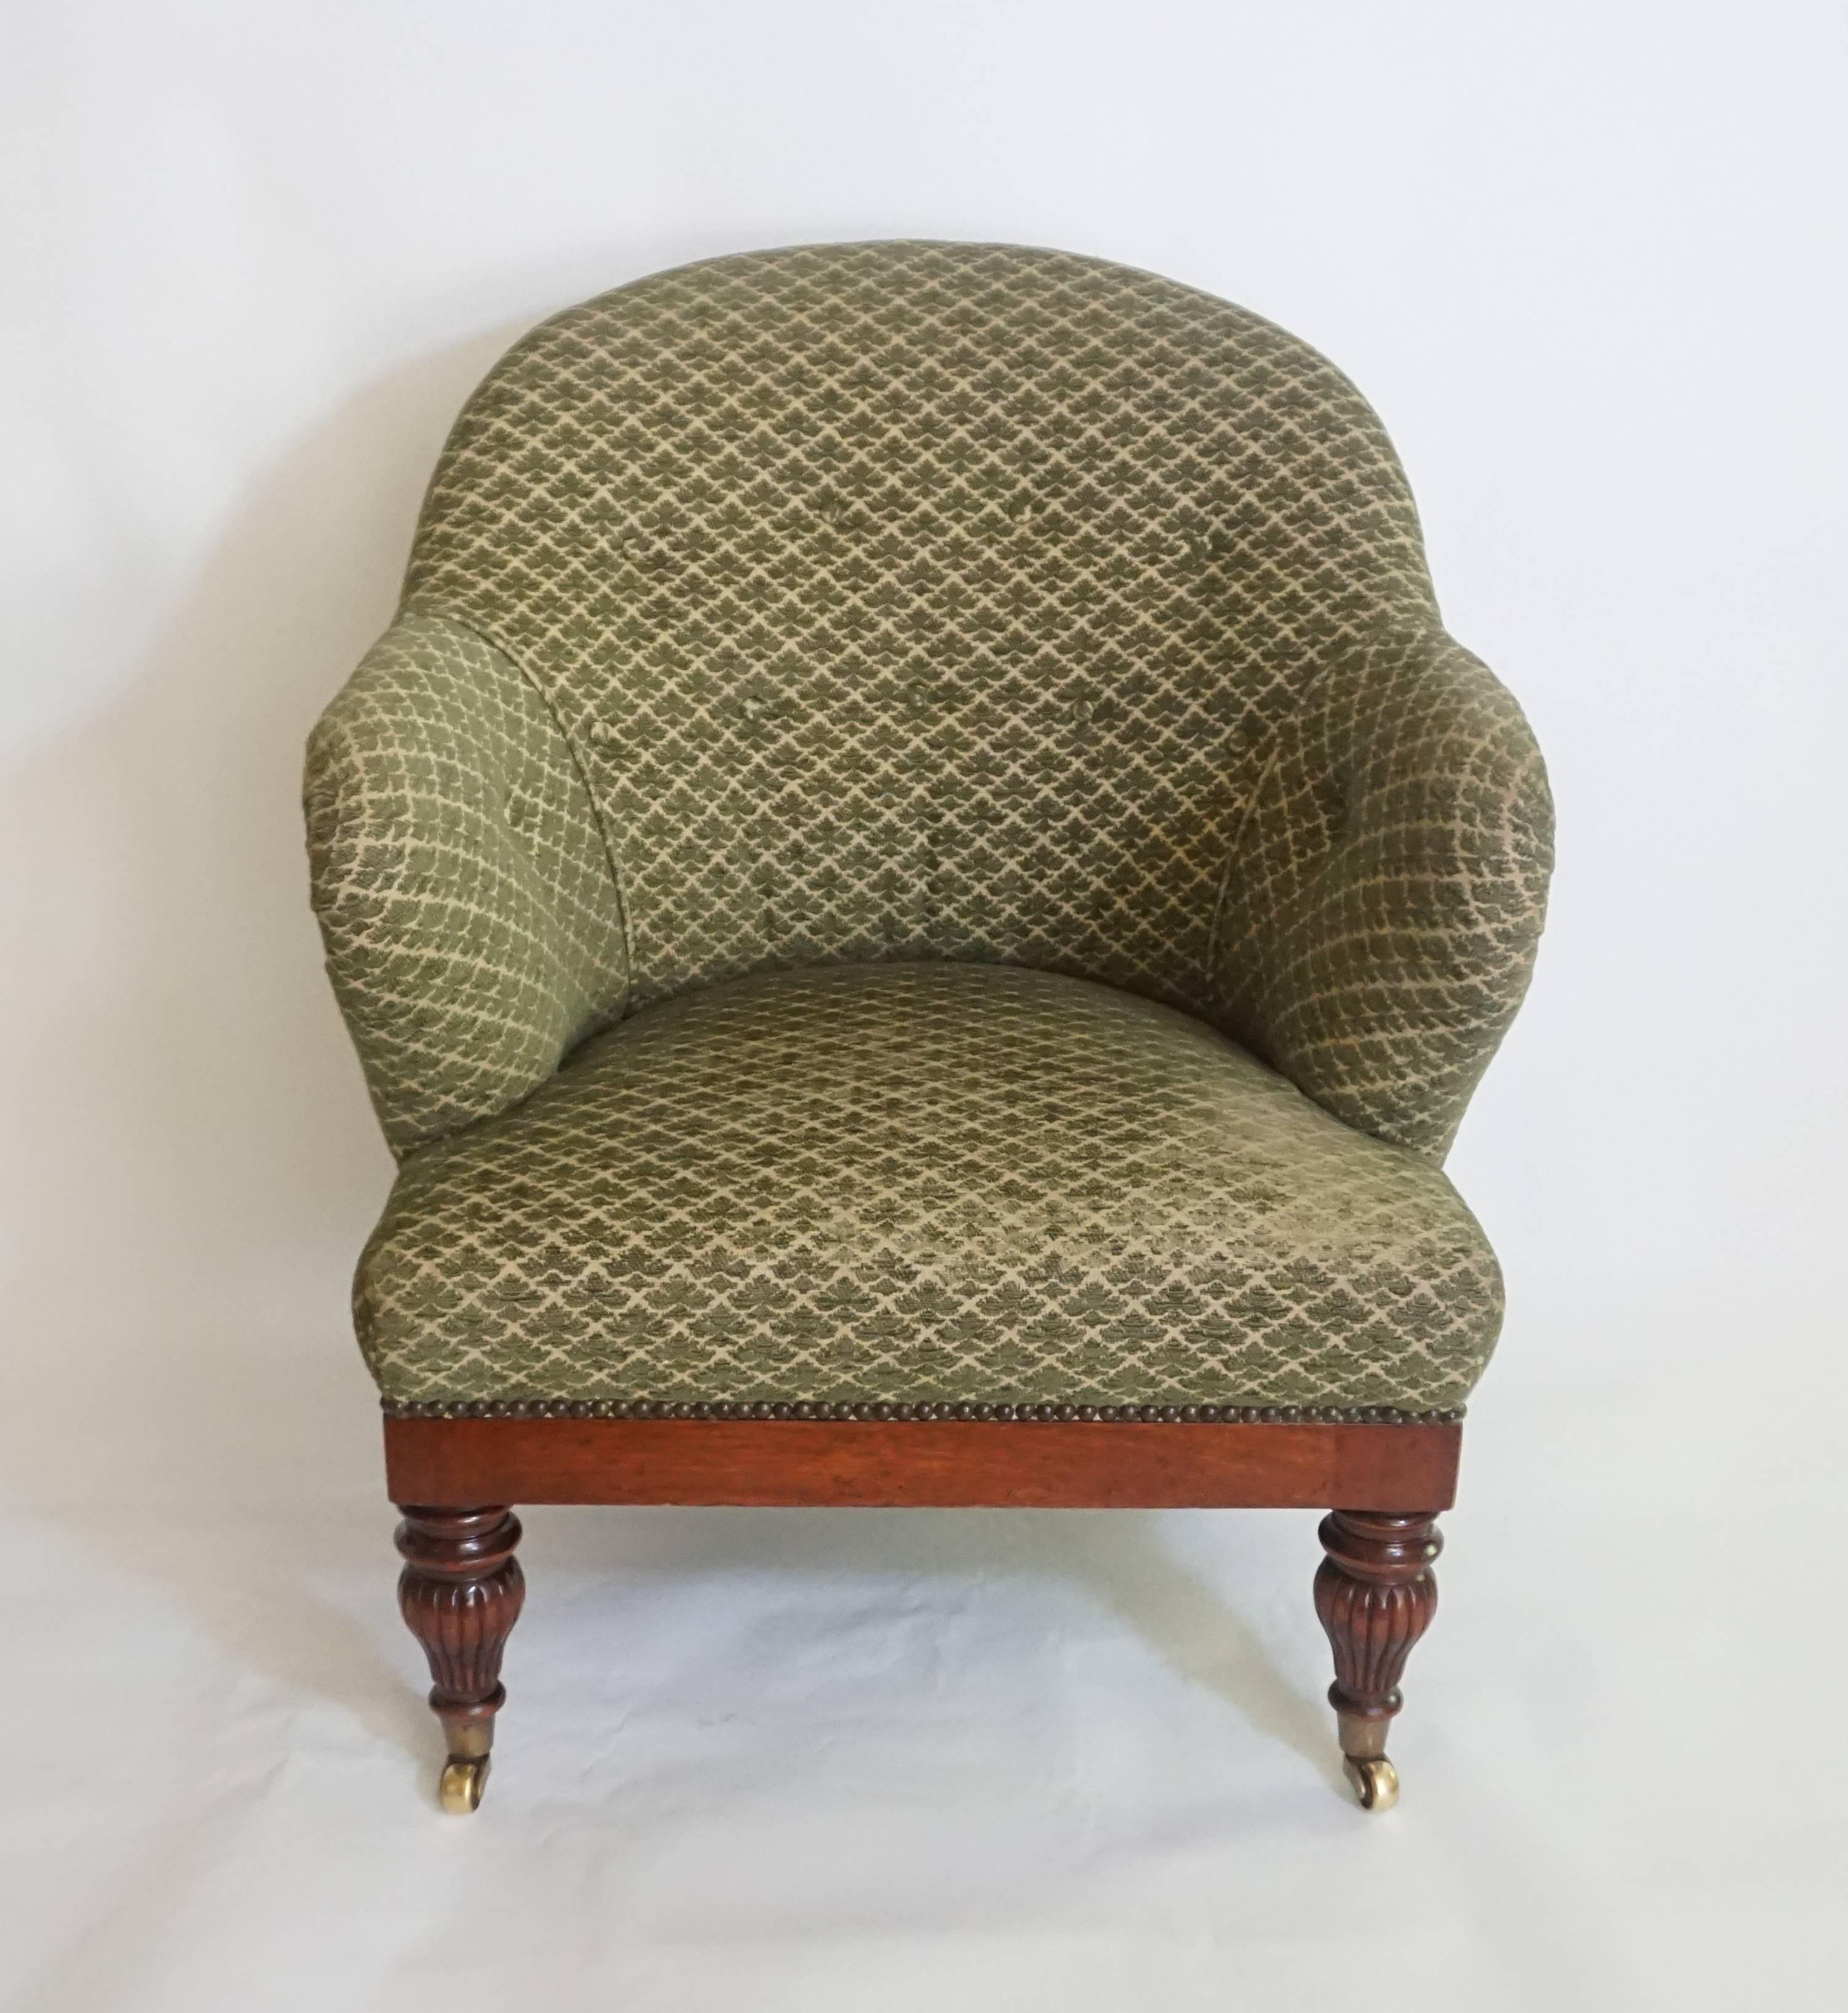 Hand-Carved English Regency Style Tub or Club Chair Attributed to Howard and Sons